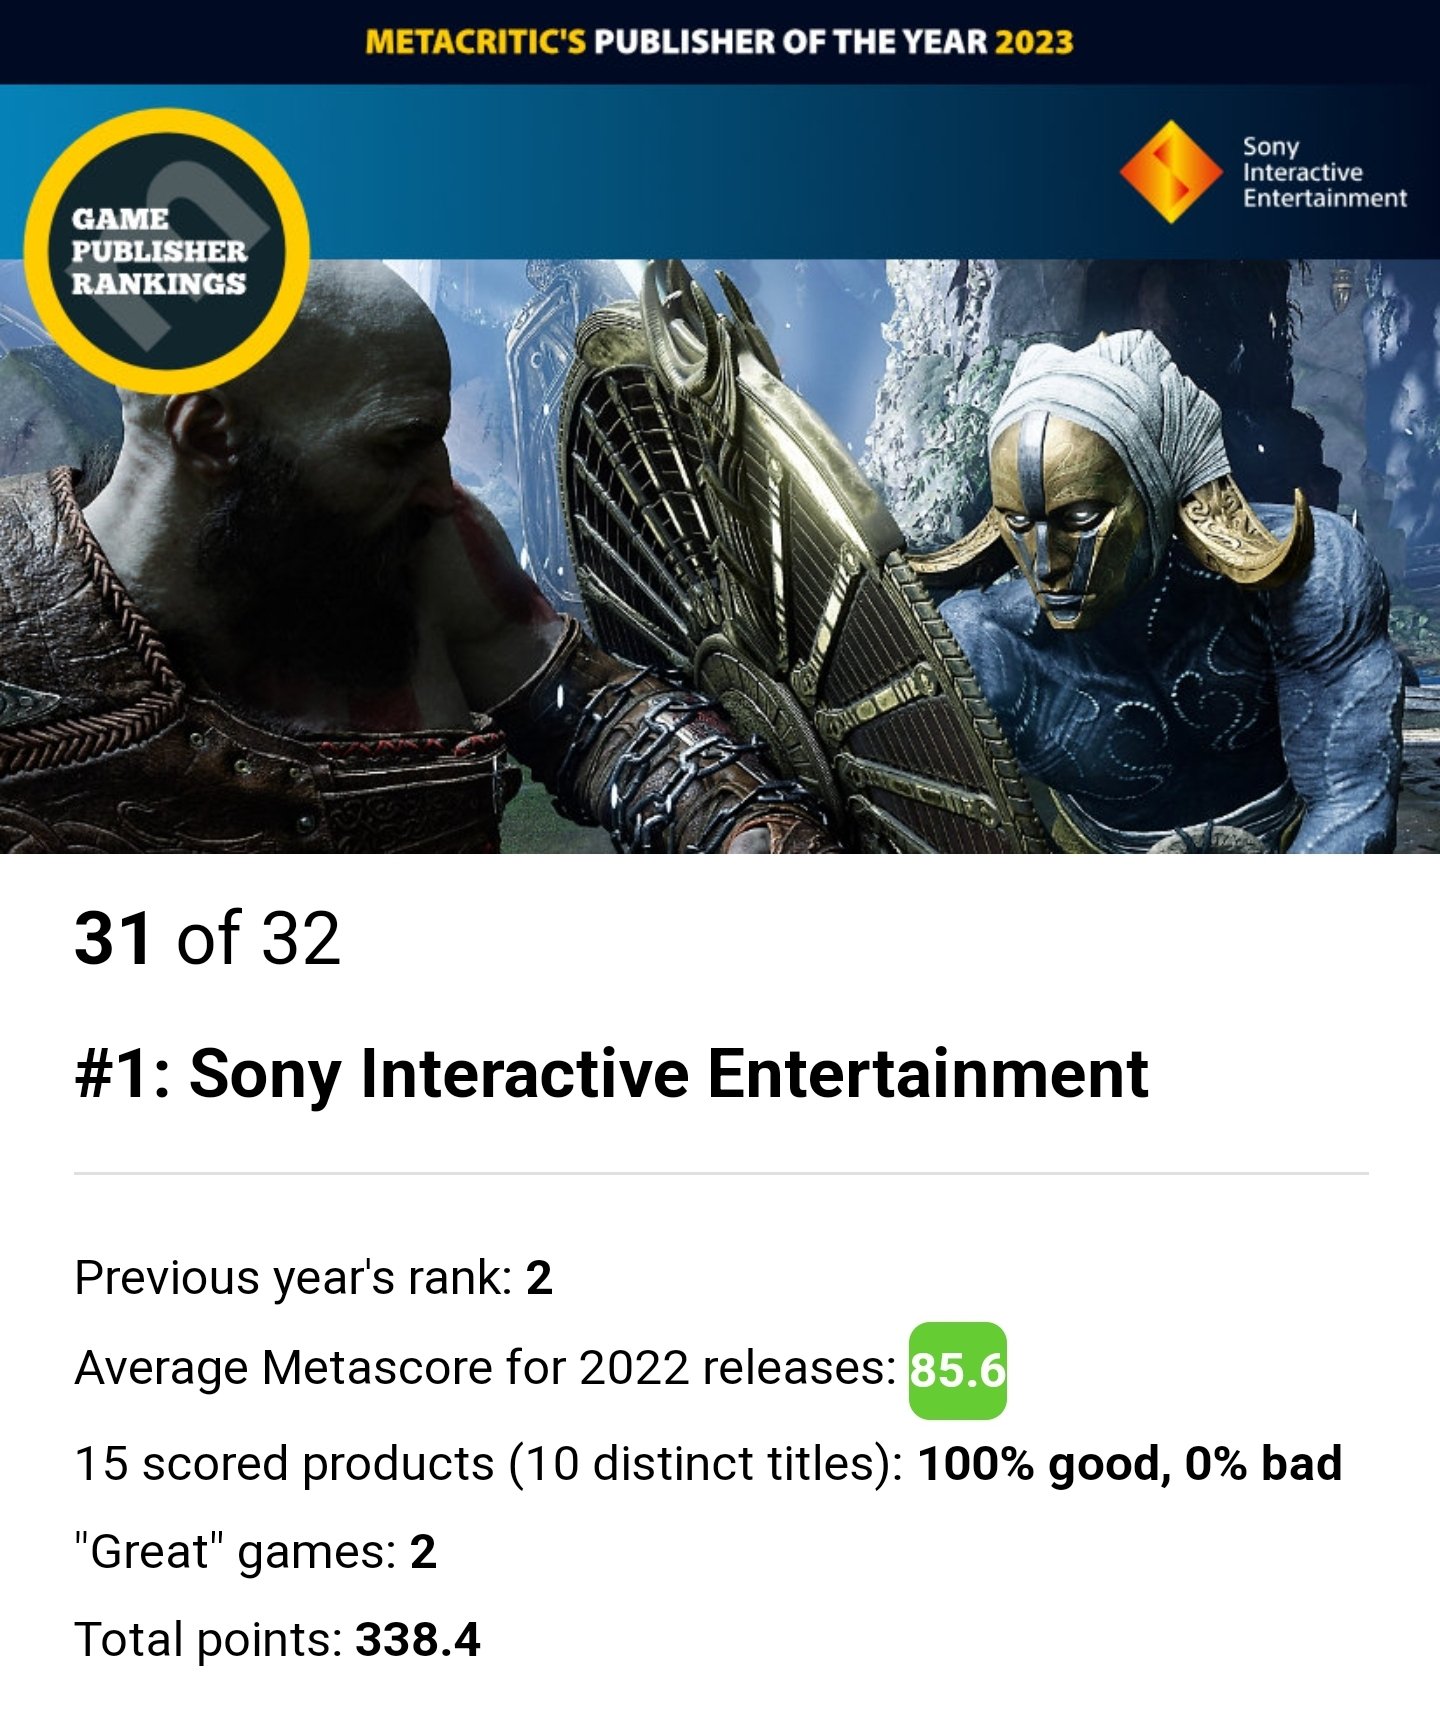 The Top Games of 2022 Ranked By Metacritic